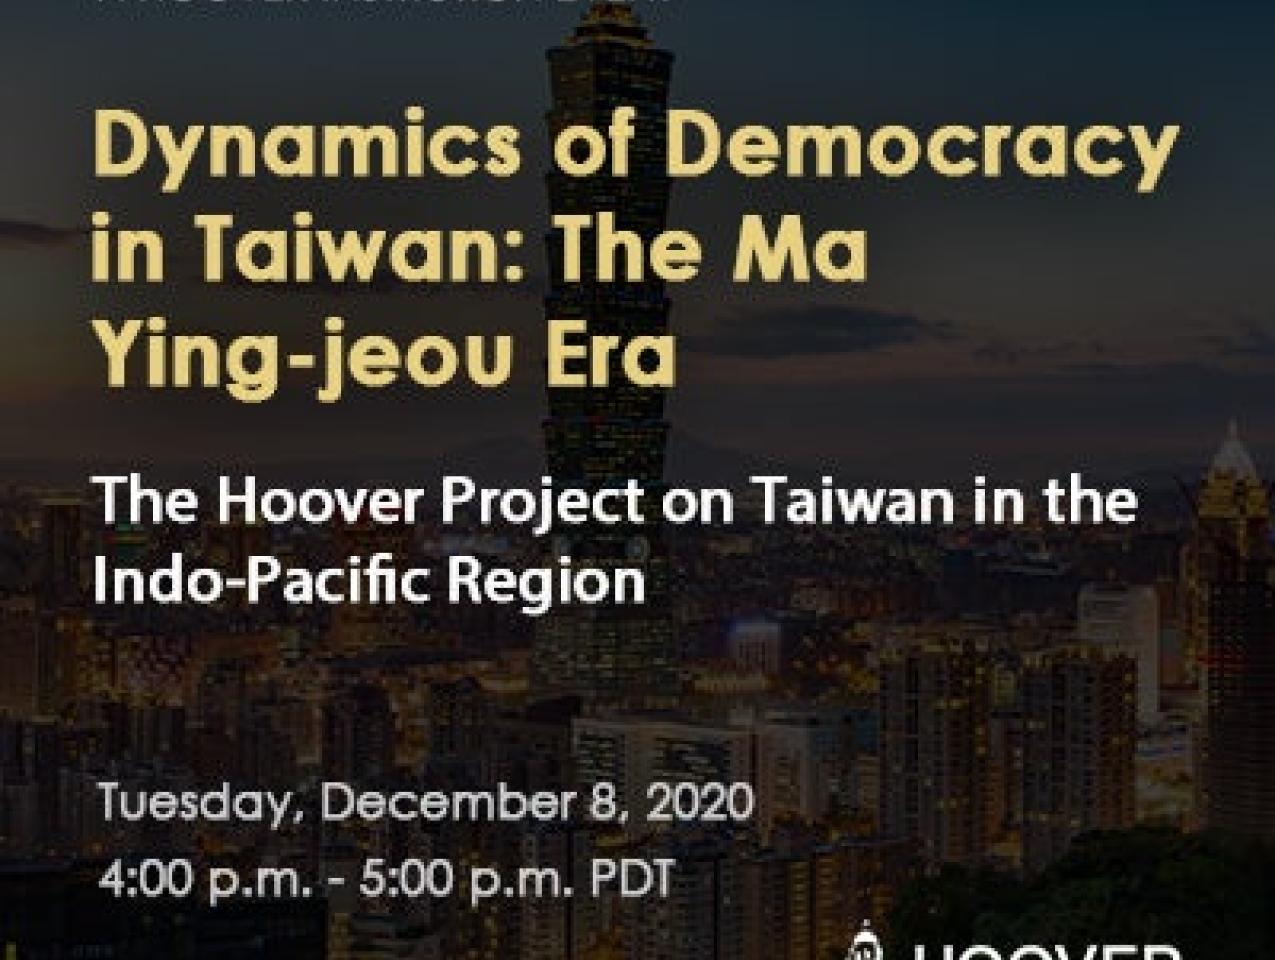 Image for Dynamics of Democracy in Taiwan: The Ma Ying-jeou Era